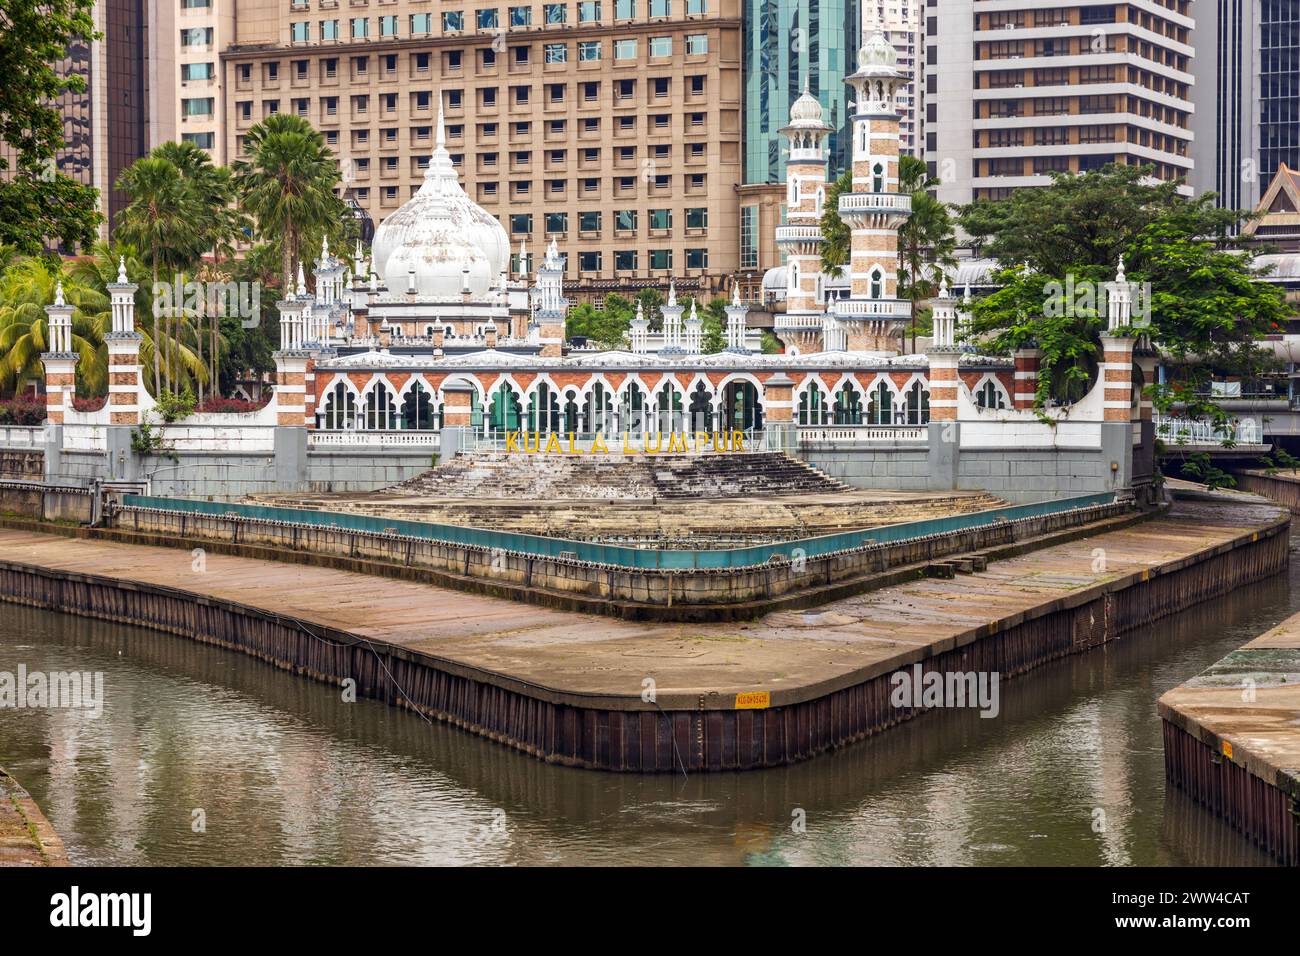 The River of Life / Kolam Biru fountain at the confluence of the Klang and Gombak River in Kuala Lumpur, Malaysia Stock Photo